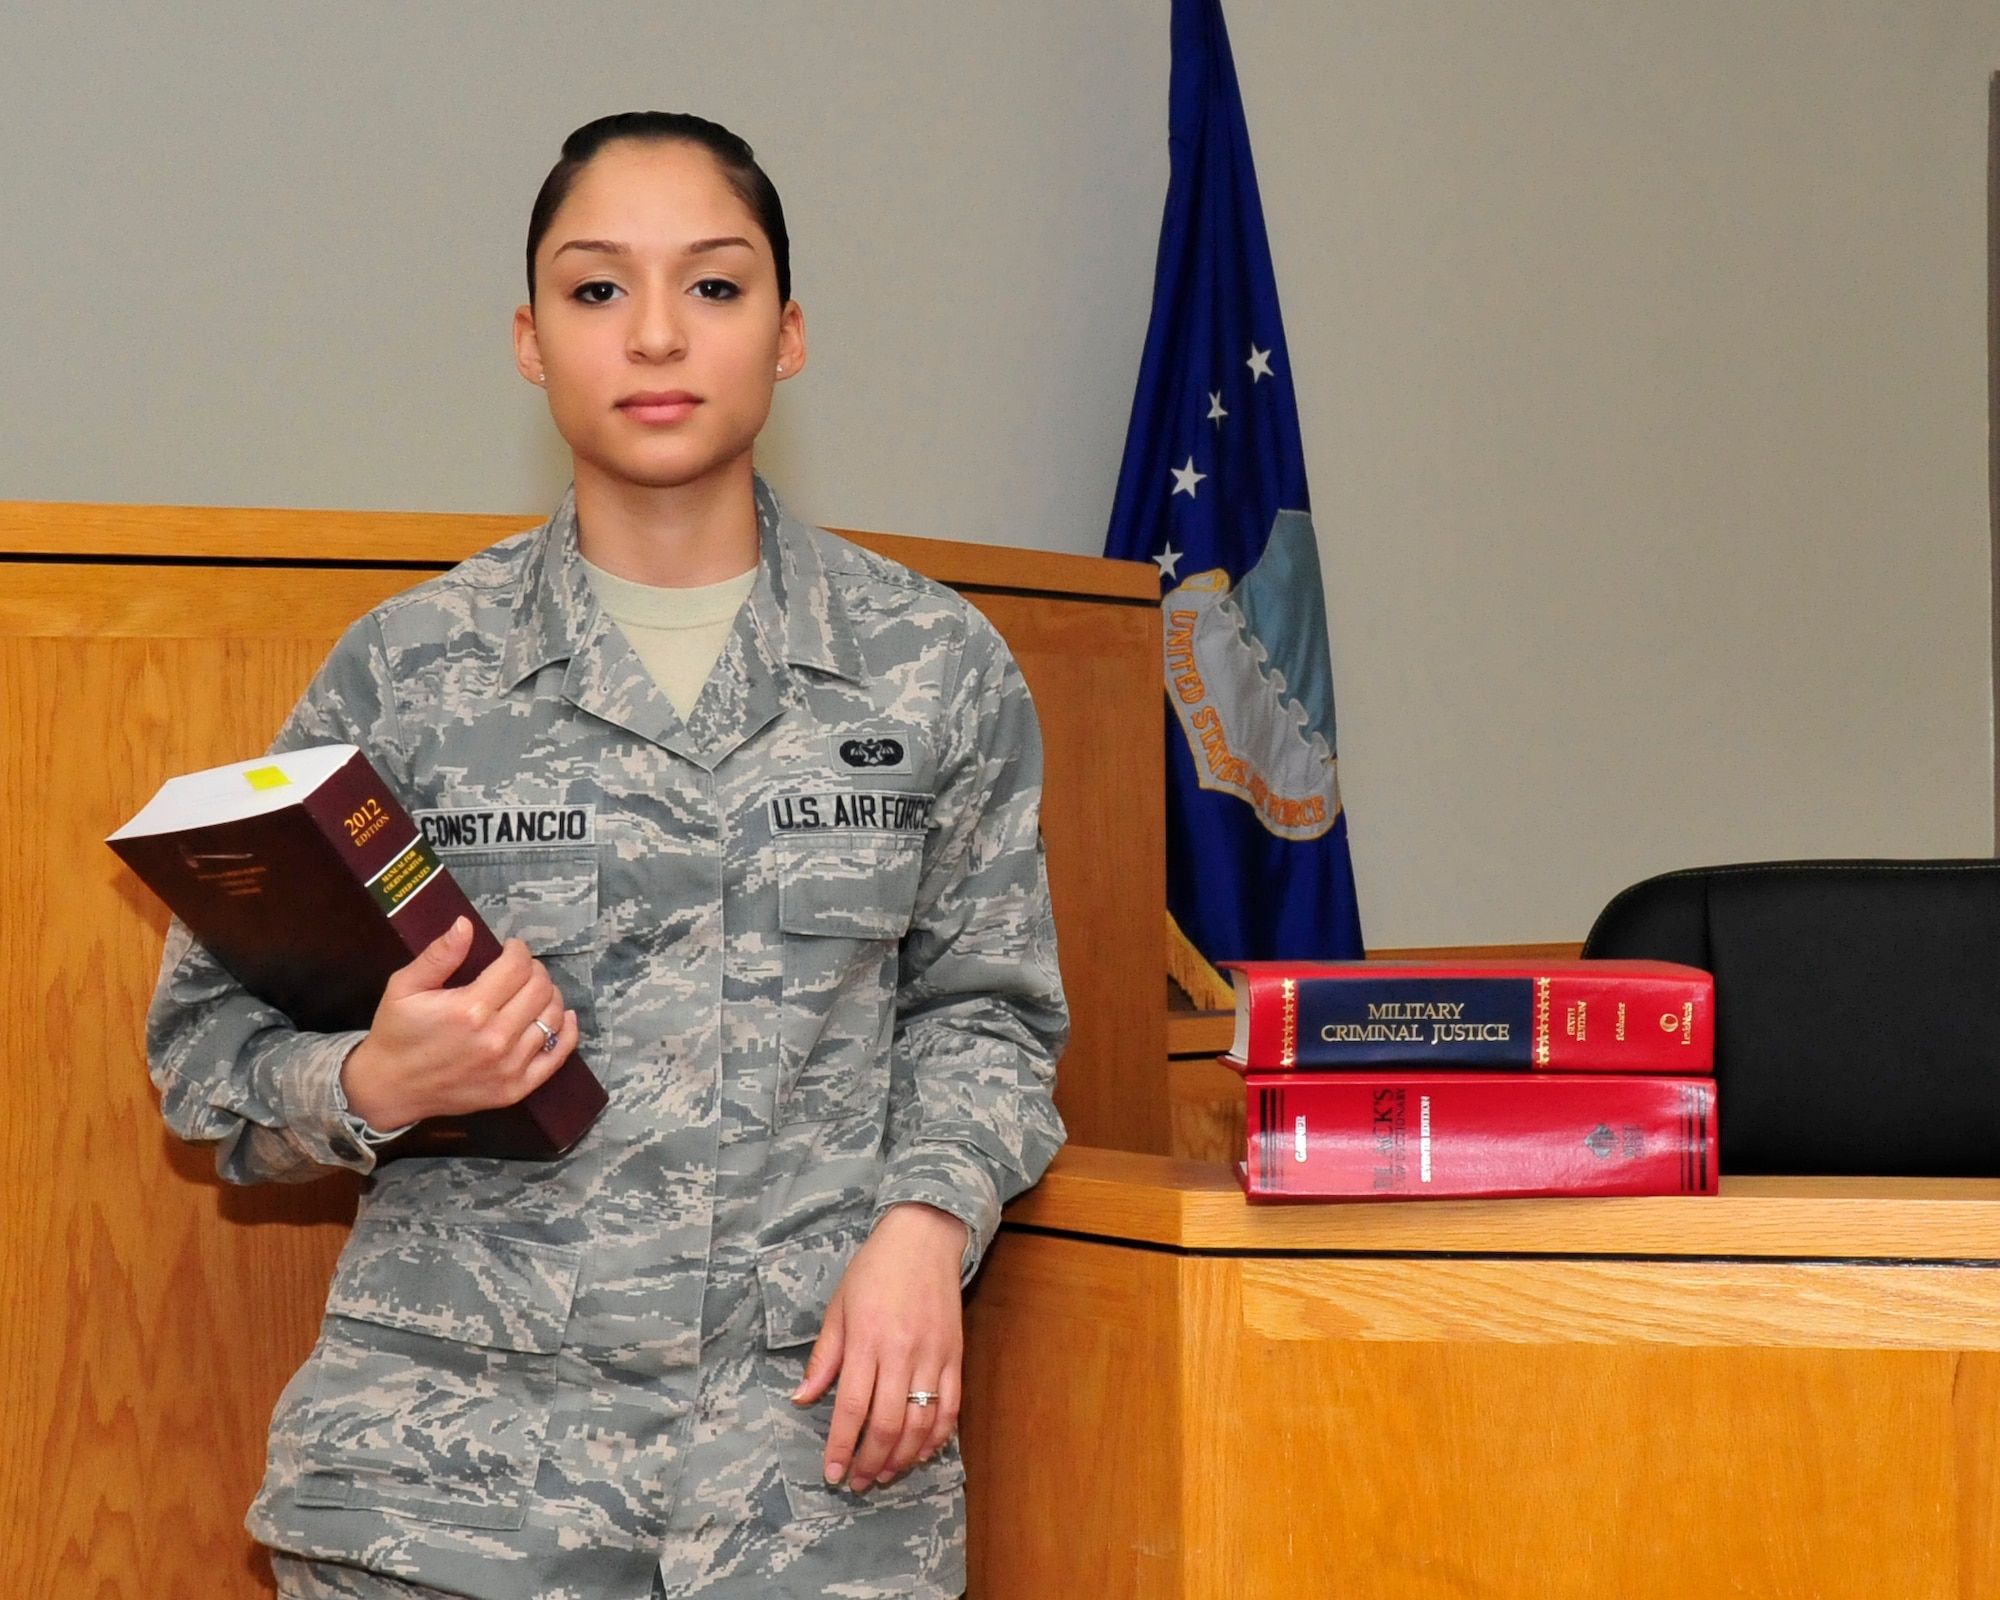 Airman 1st Class Savella Constancio, 436th Airlift Wing Jude Advocate military justice paralegal, stands in the courtroom Nov 18, 2013, at Dover Air Force Base, Del. Constancio is being recognized by her leadership as Airman of the Month. (U.S. Air Force photo/Airman 1st Class William Johnson)